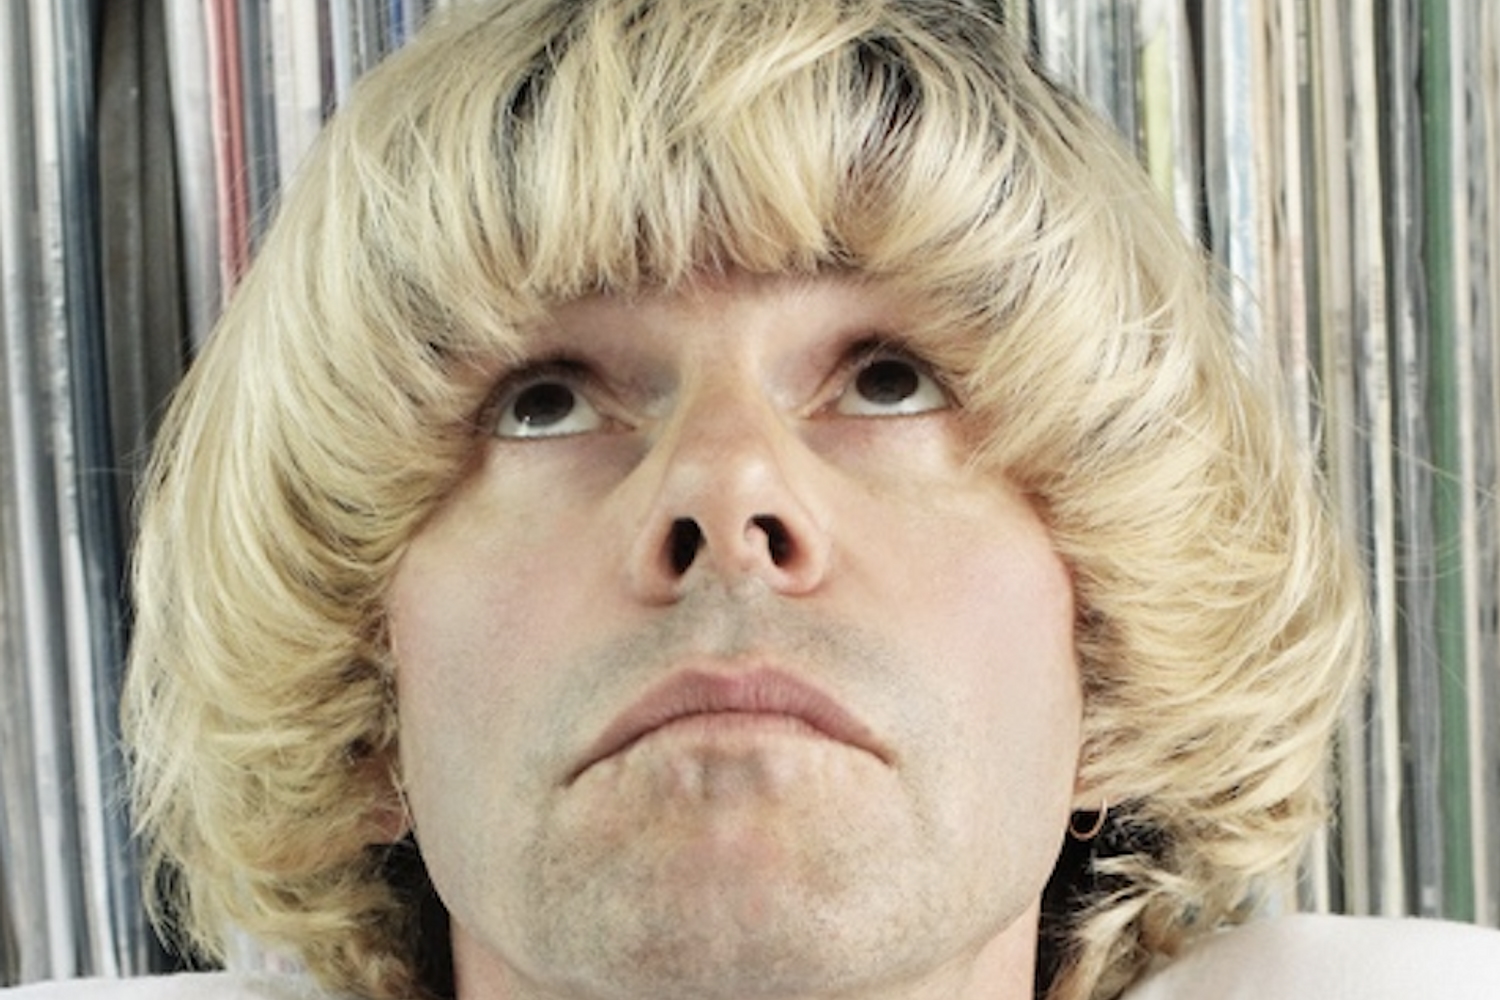 Tim Burgess announces new EP 'Ascent Of The Ascended'